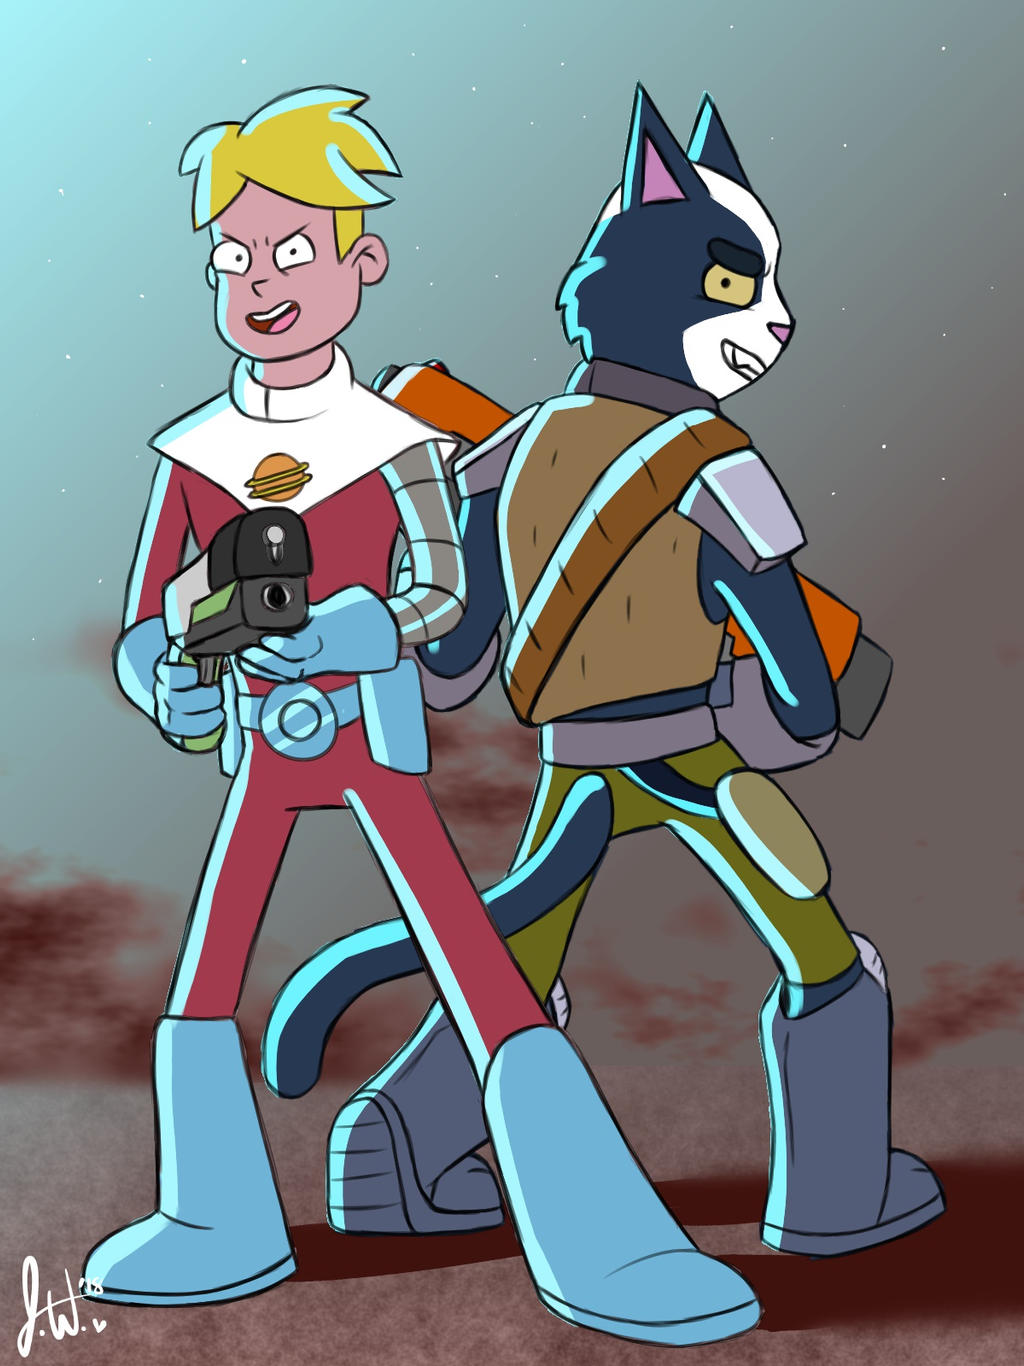 Final Space! by Dallywag on DeviantArt